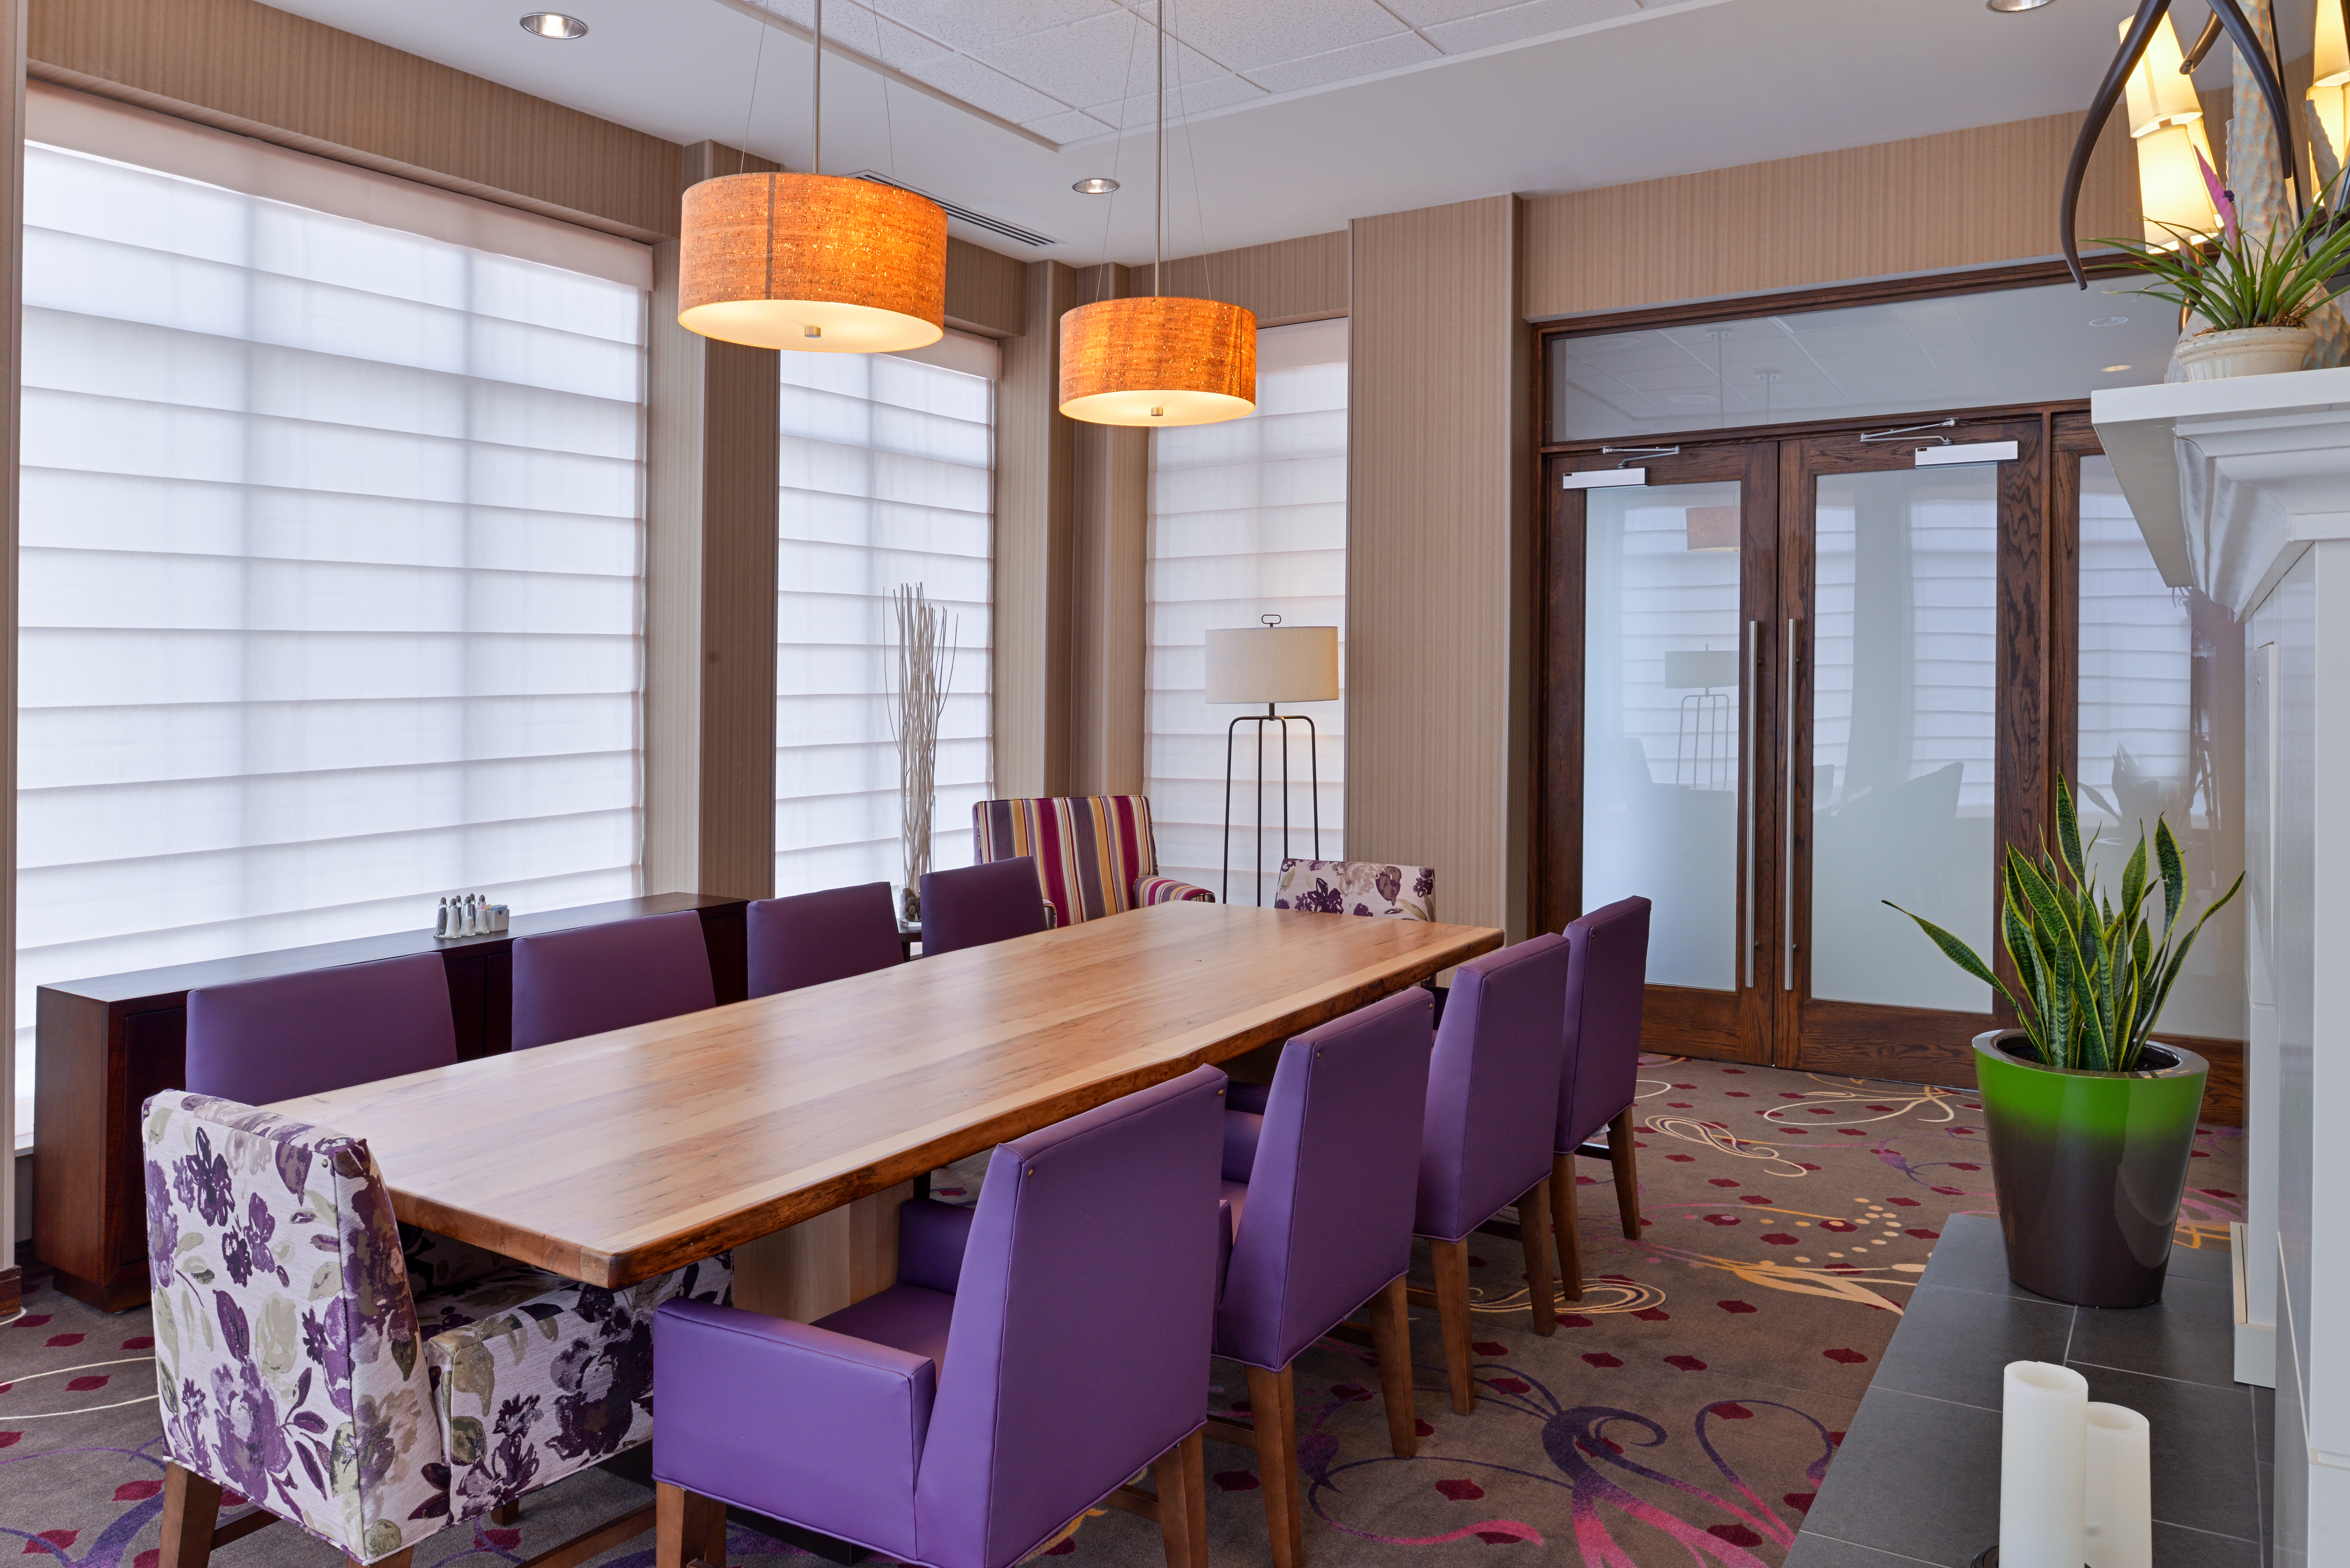 Conference Room With Large Windows and Long Table Surrounded by Purple Chairs